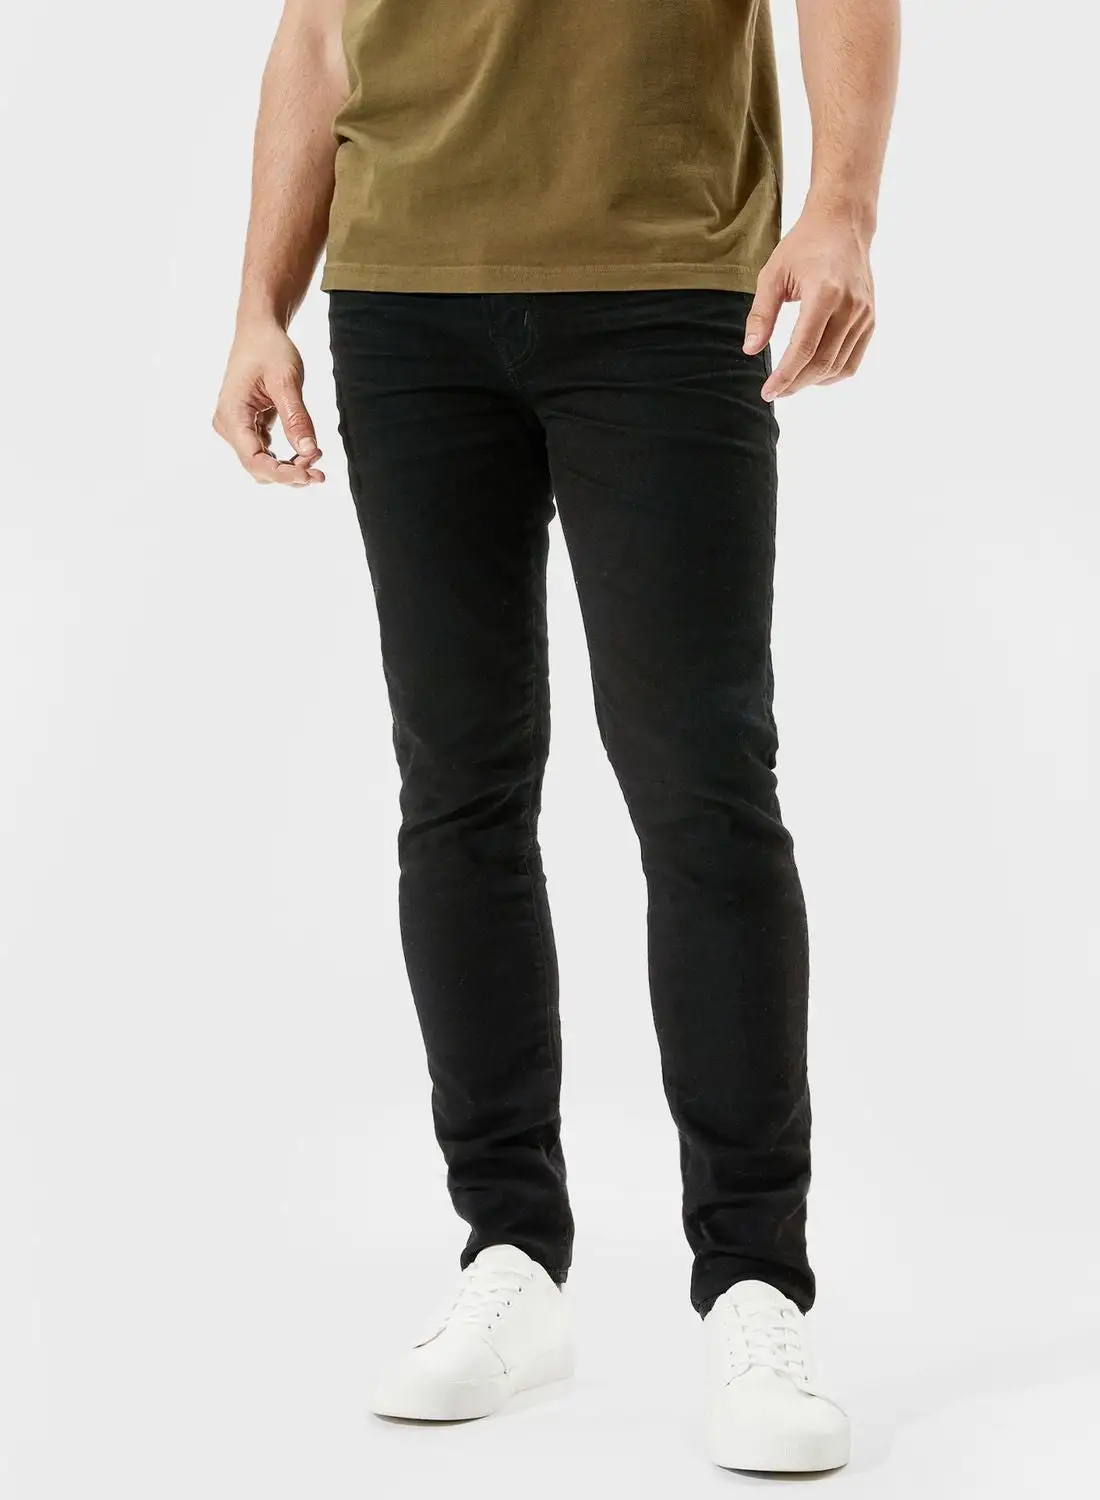 American Eagle Distressed Skinny Fit Jeans